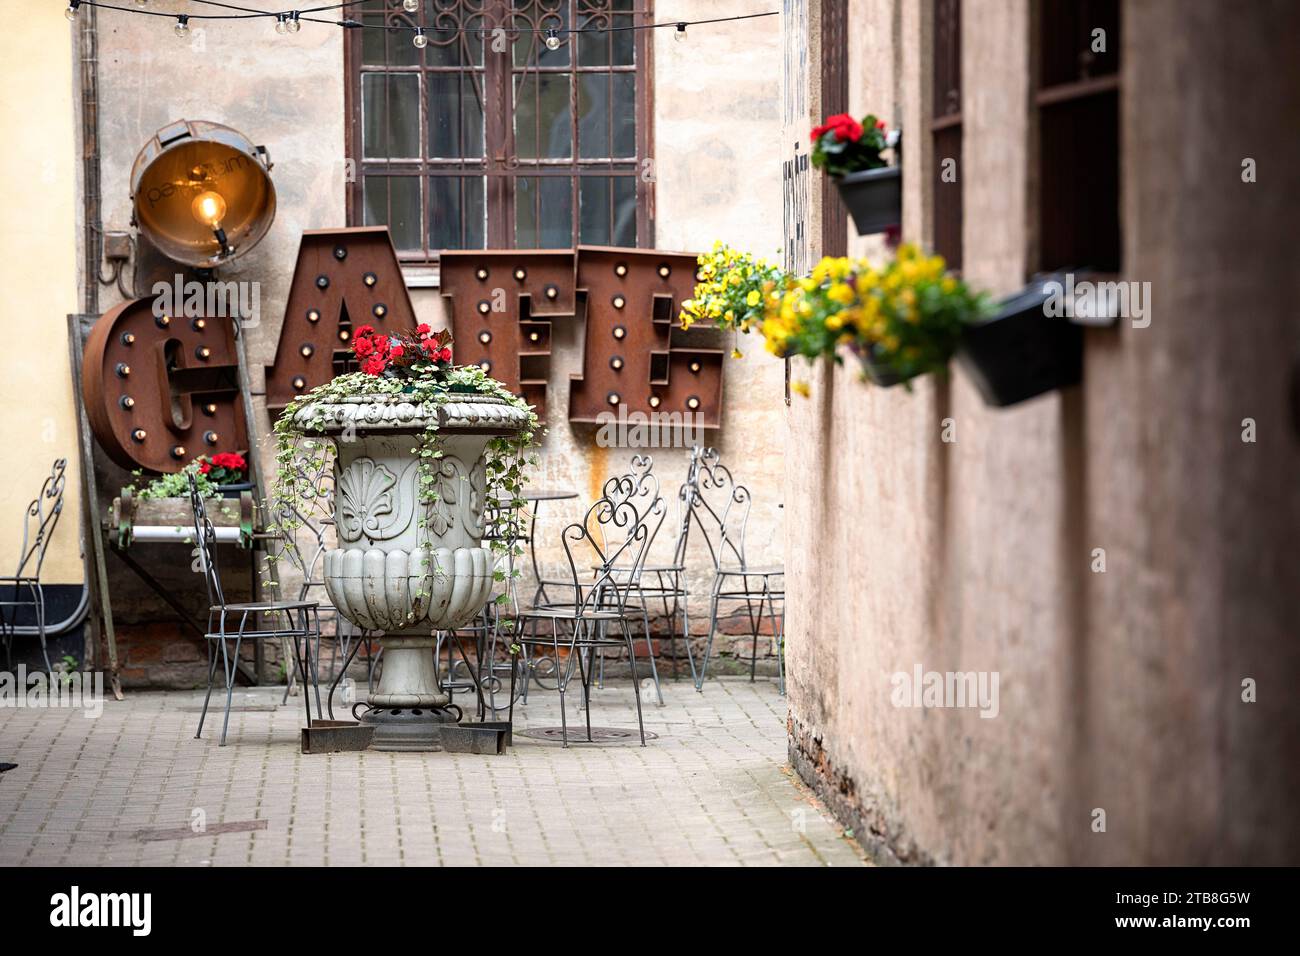 Beautifully decorated bar, restaurant in an old part of RIga city in Latvia Stock Photo